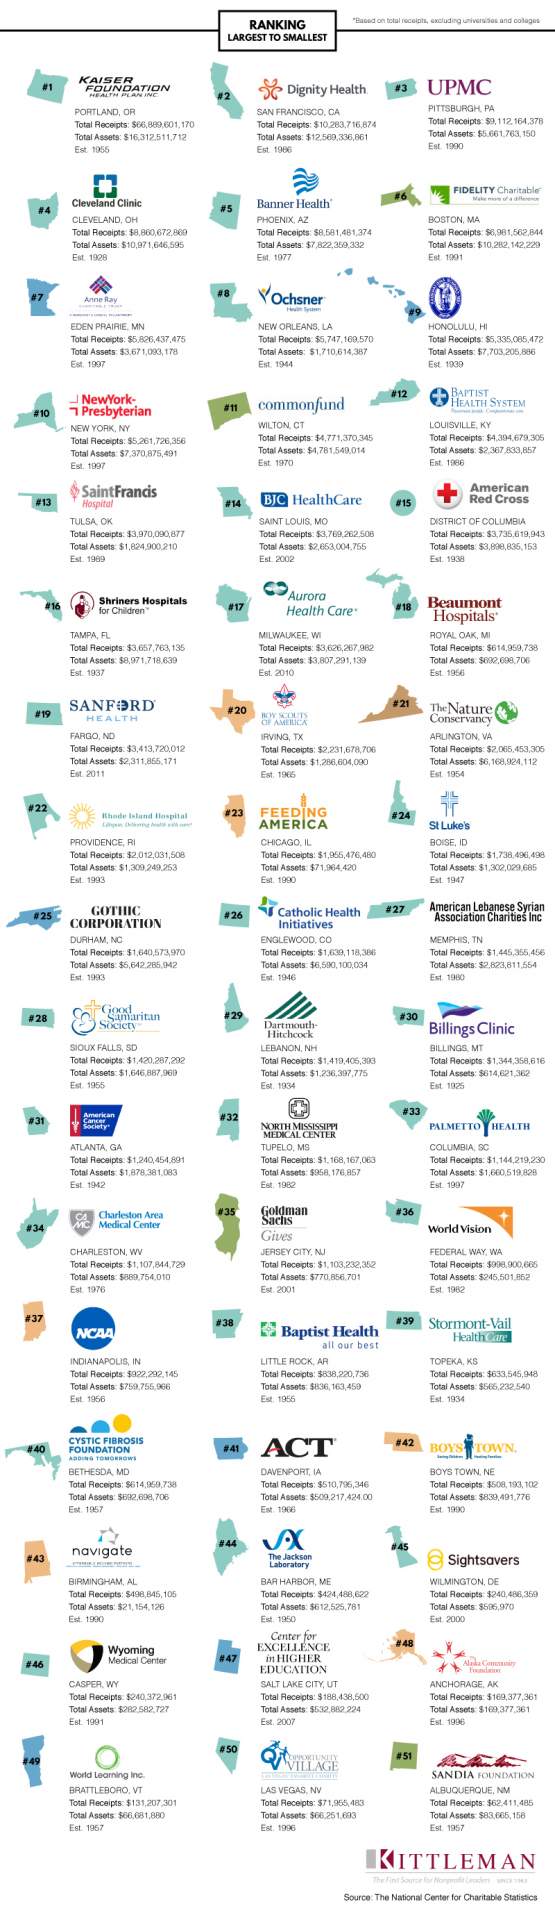 Raking of the top nonprofits per State, Kaiser Foundation of Portland, Oregon is the top